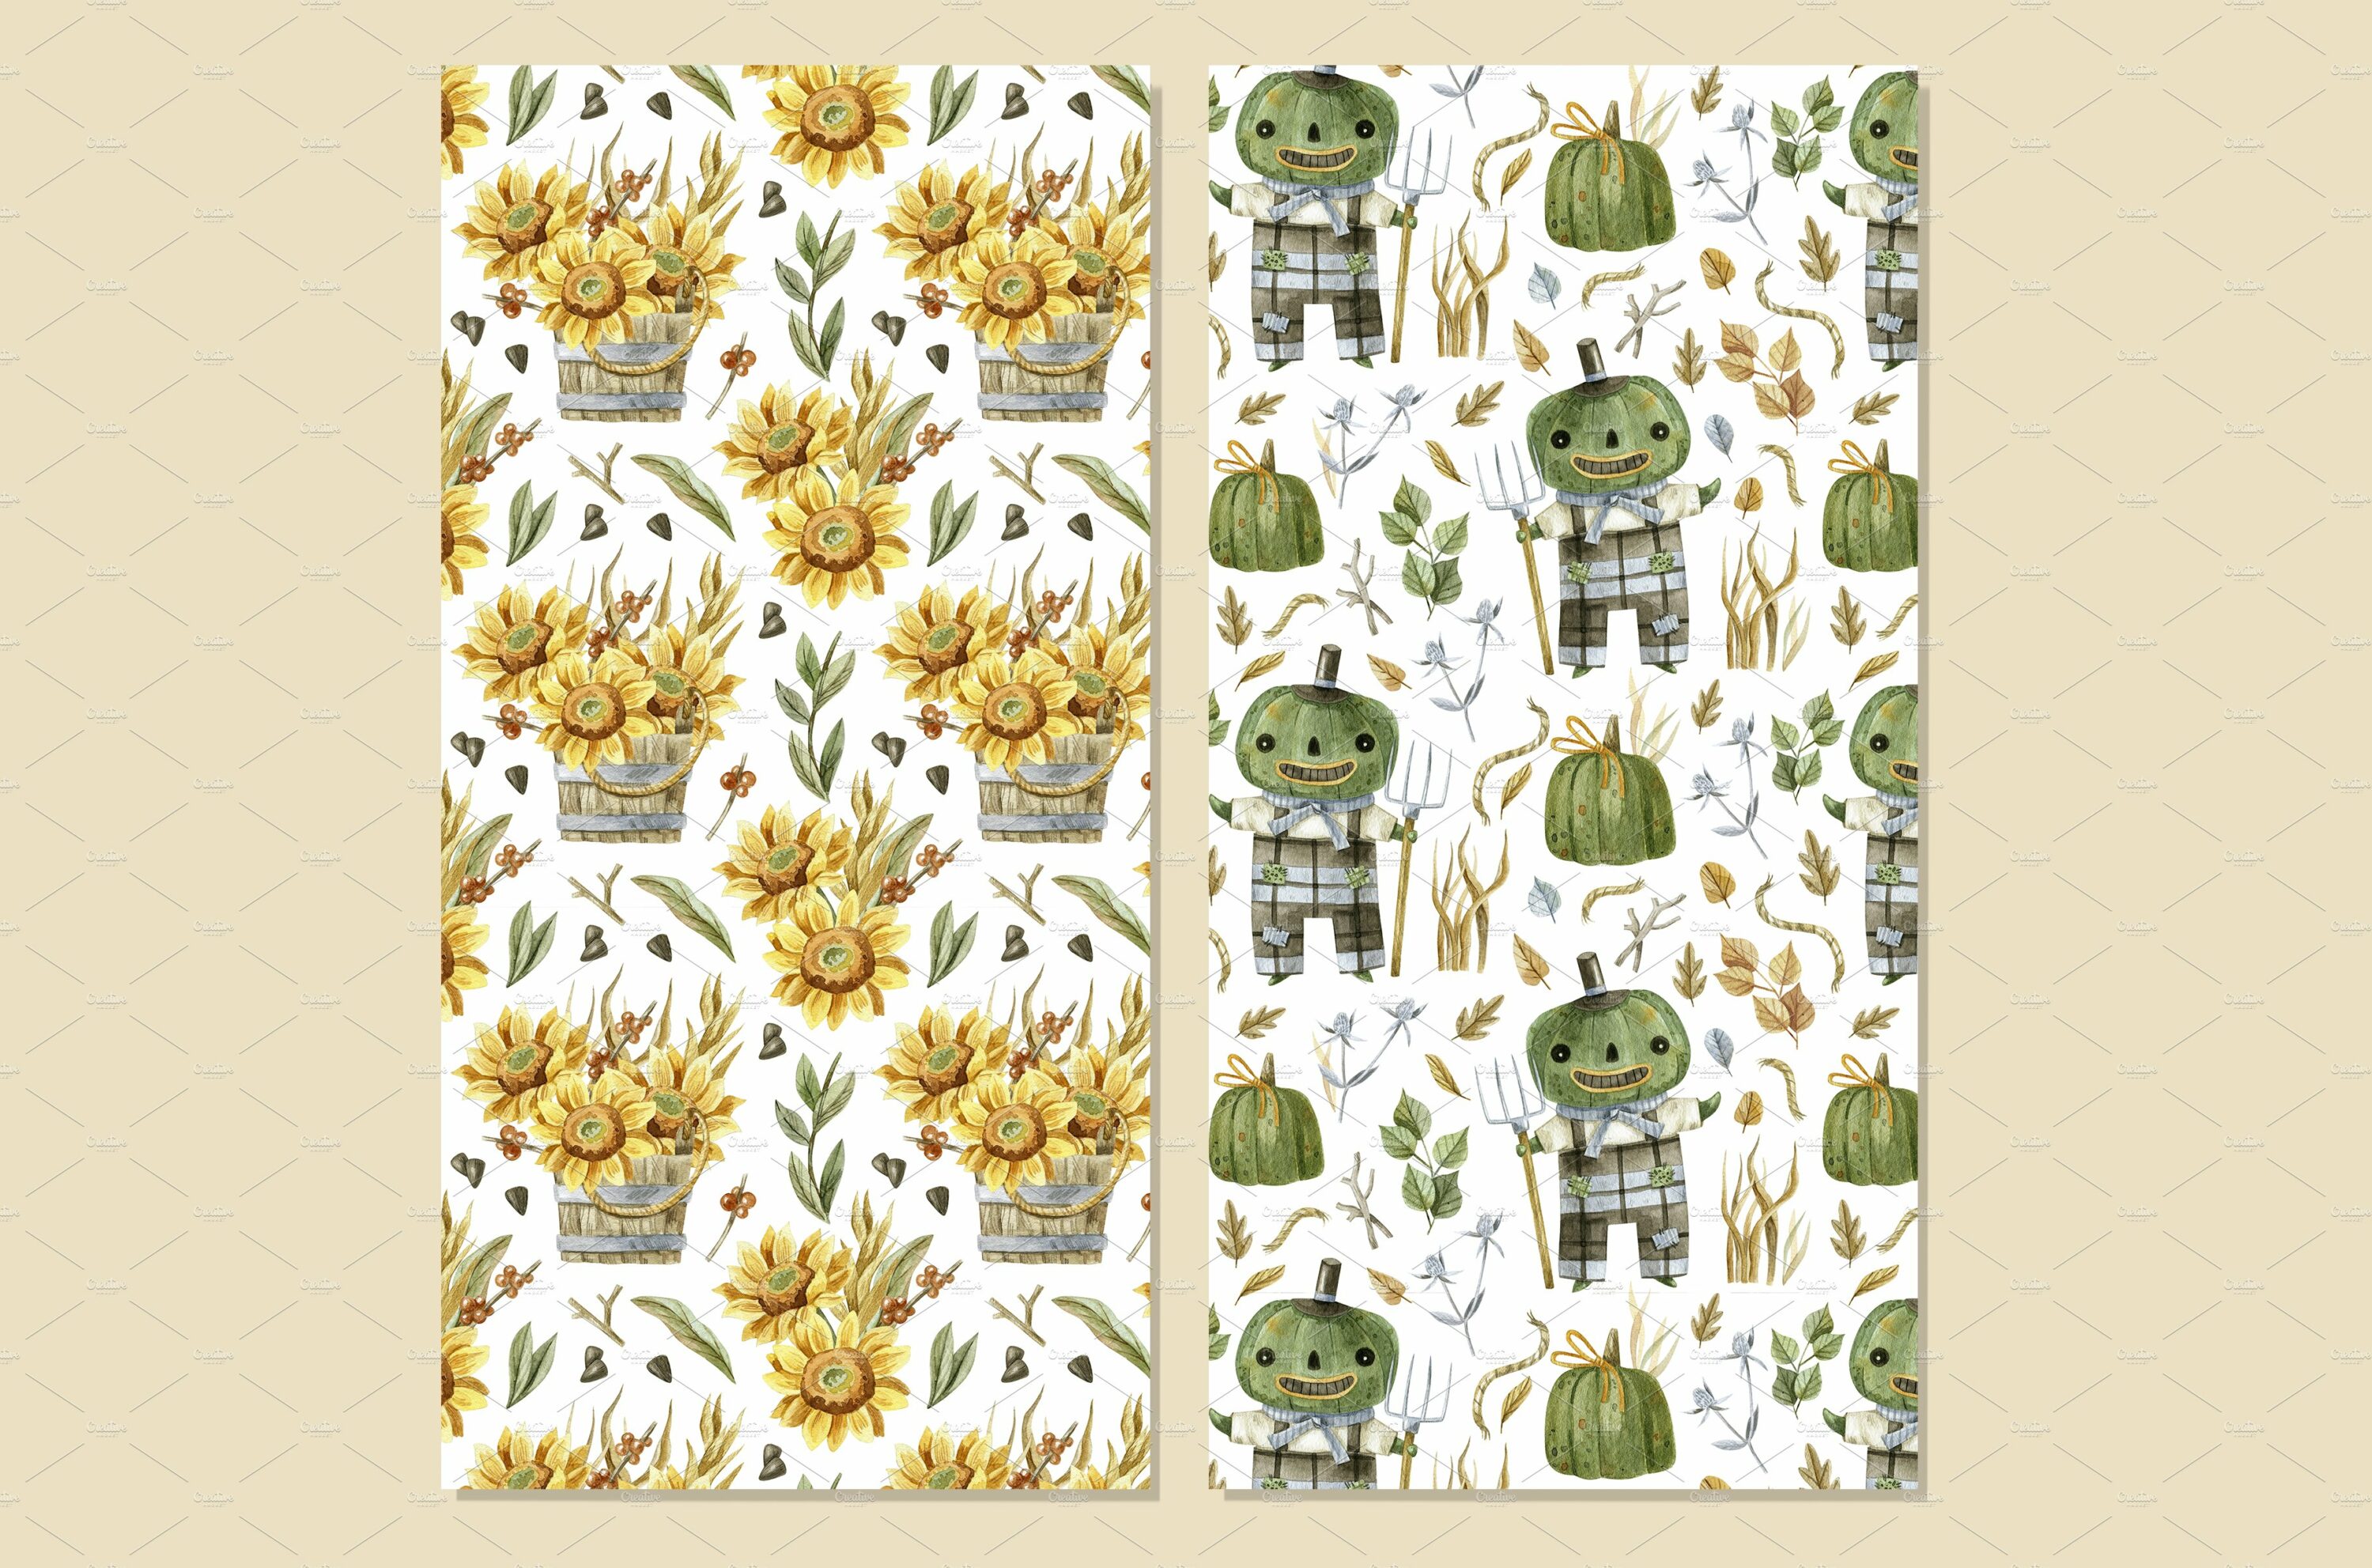 Two patterns with pumpkins and wild flowers.